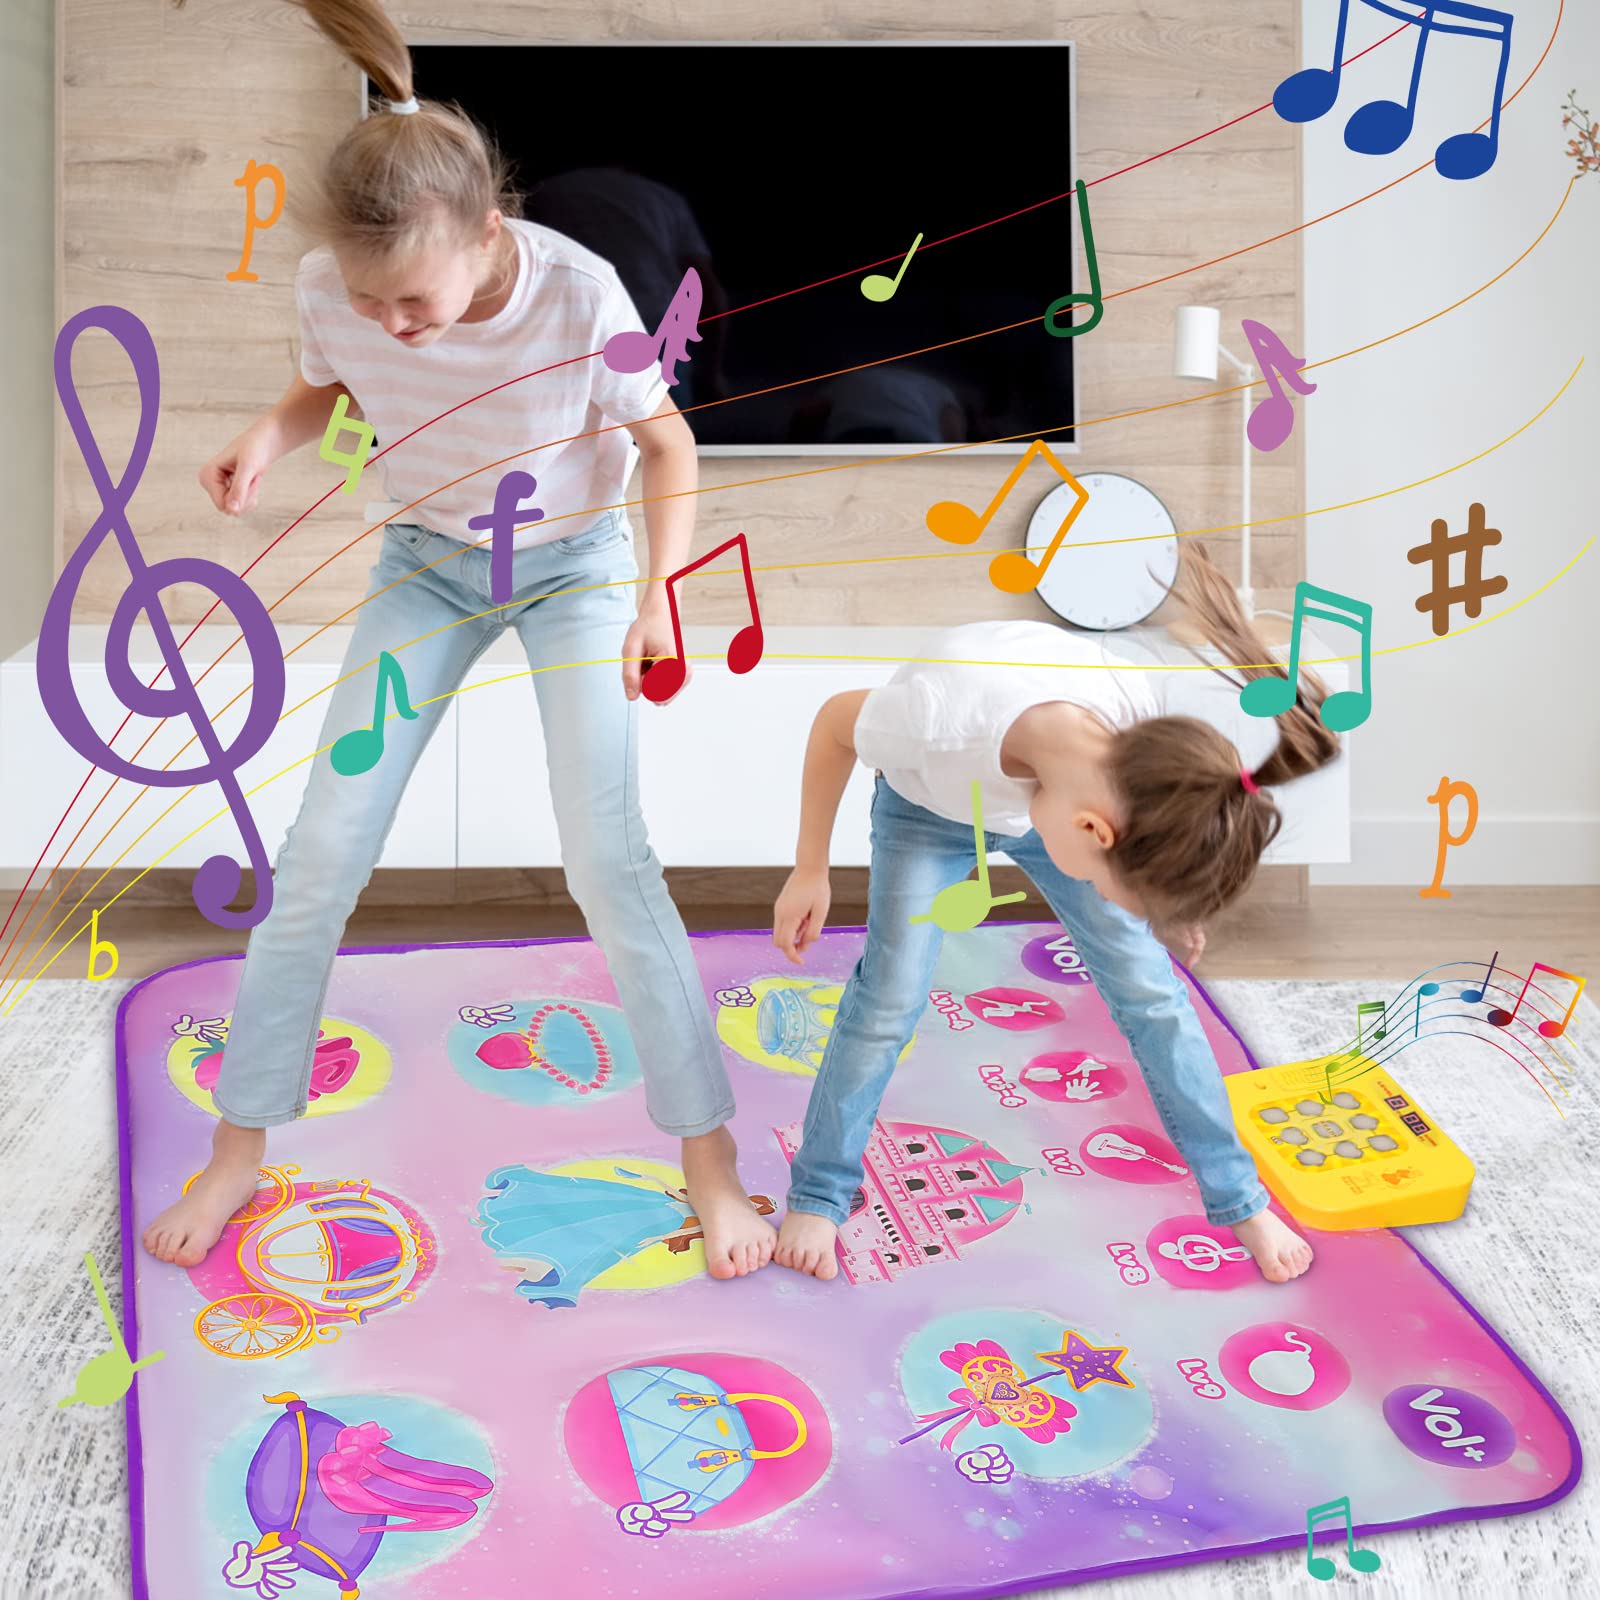 Dance Mat Toy Gift for 3-12 Year Old Girls Boys, Electronic Dance Pad Game Toy for Kids, Adjustable Volume, 9 Game Modes, Best Gift Choice for Christmas, Children's Day and Birthday(38.6”x 35”)